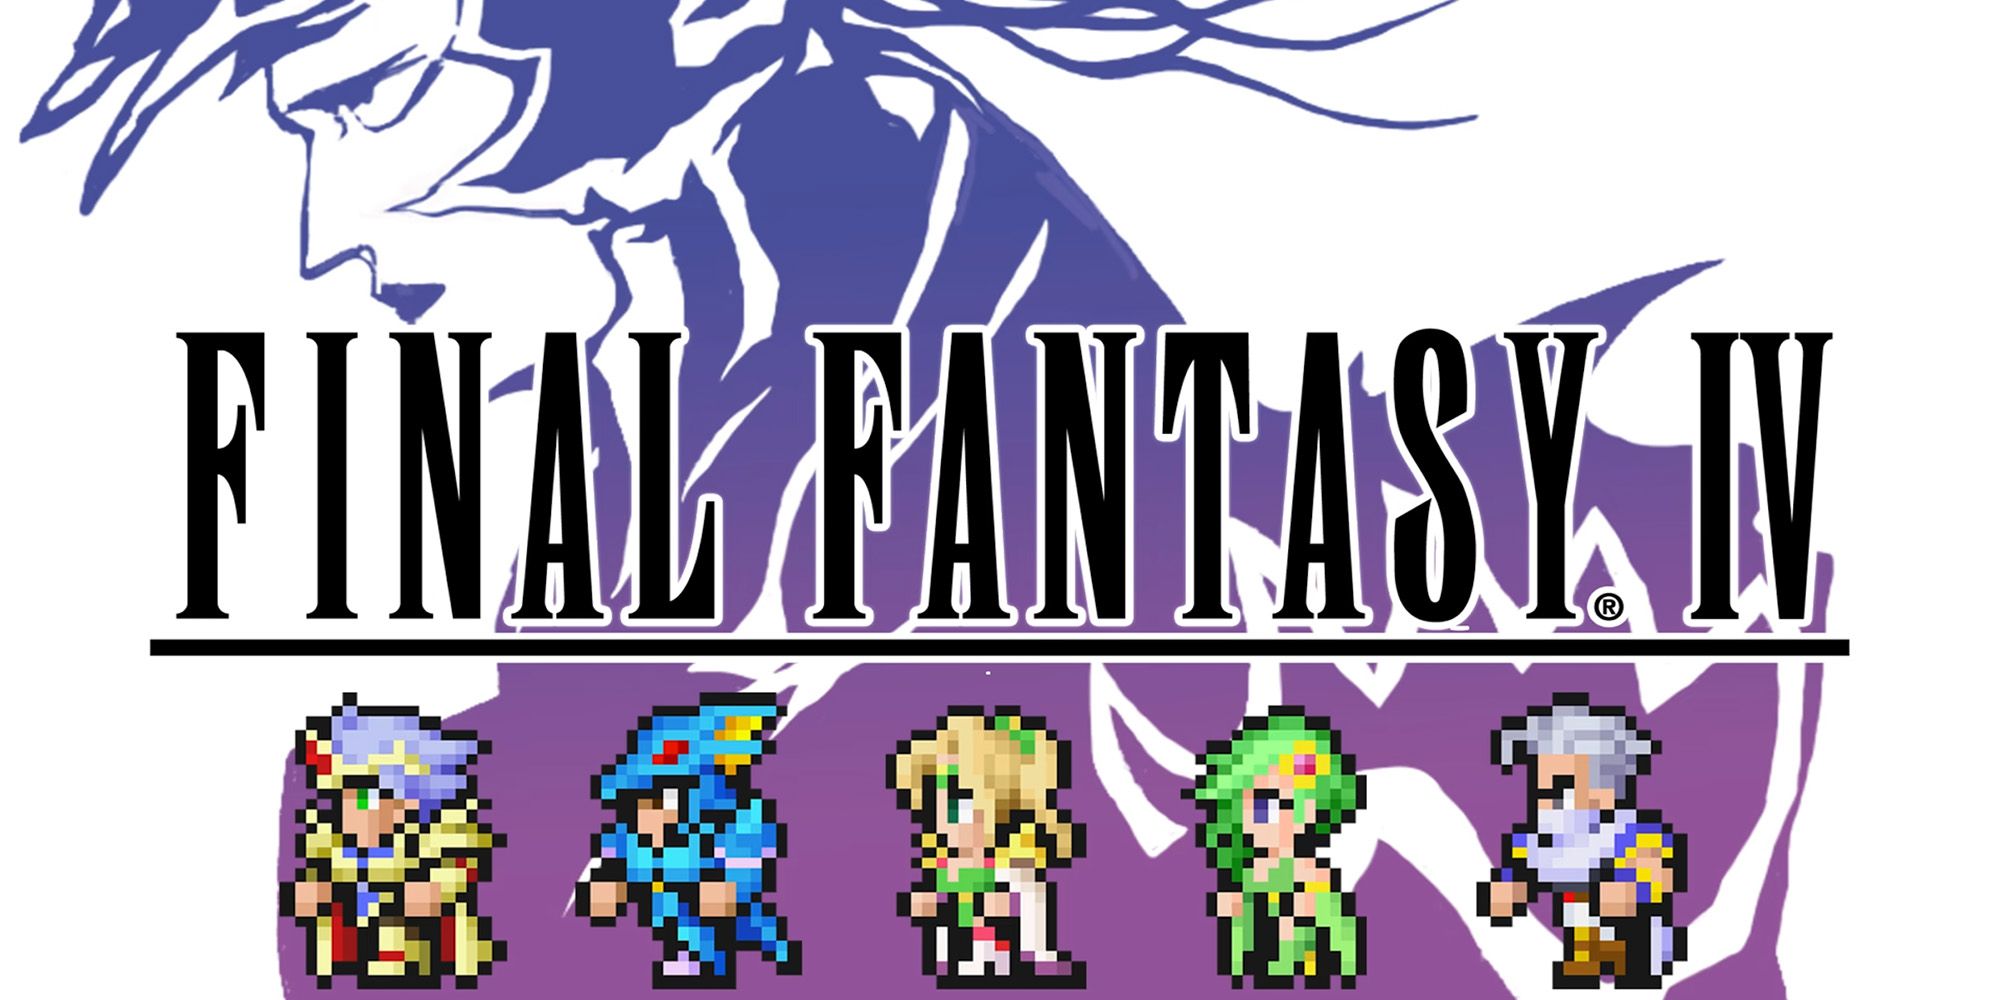 Final Fantasy 4 - The cast of Final Fantasy 4 stand in a row beneath the logo